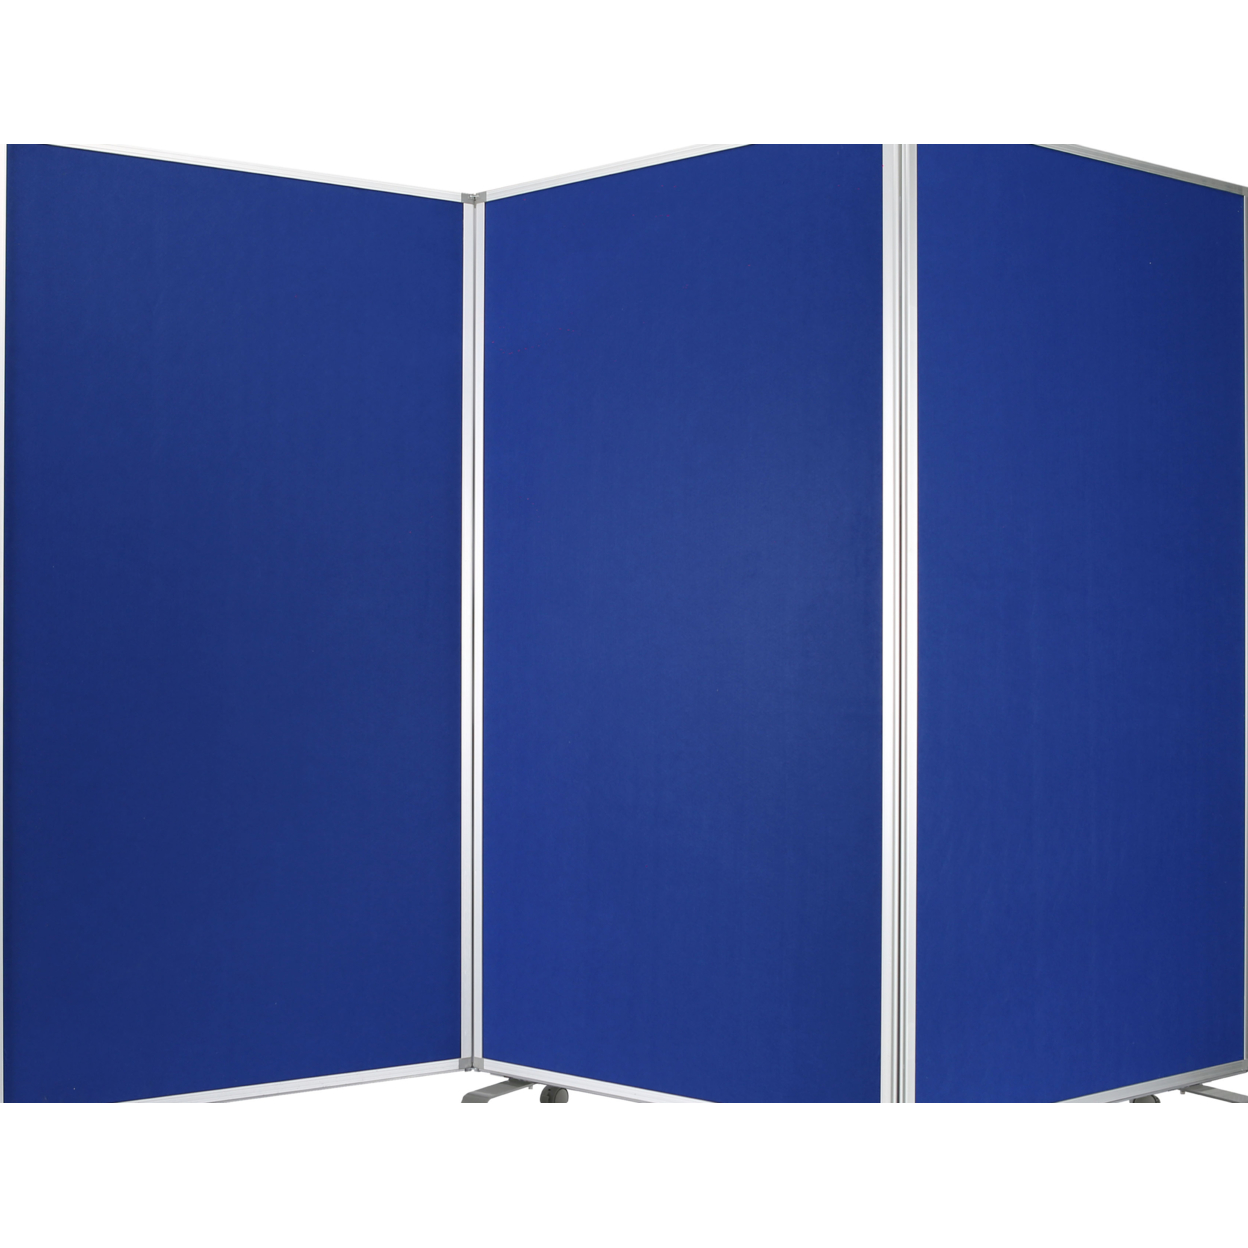 Accordion Style Fabric Upholstered 3 Panel Room Divider, Blue And Gray- Saltoro Sherpi